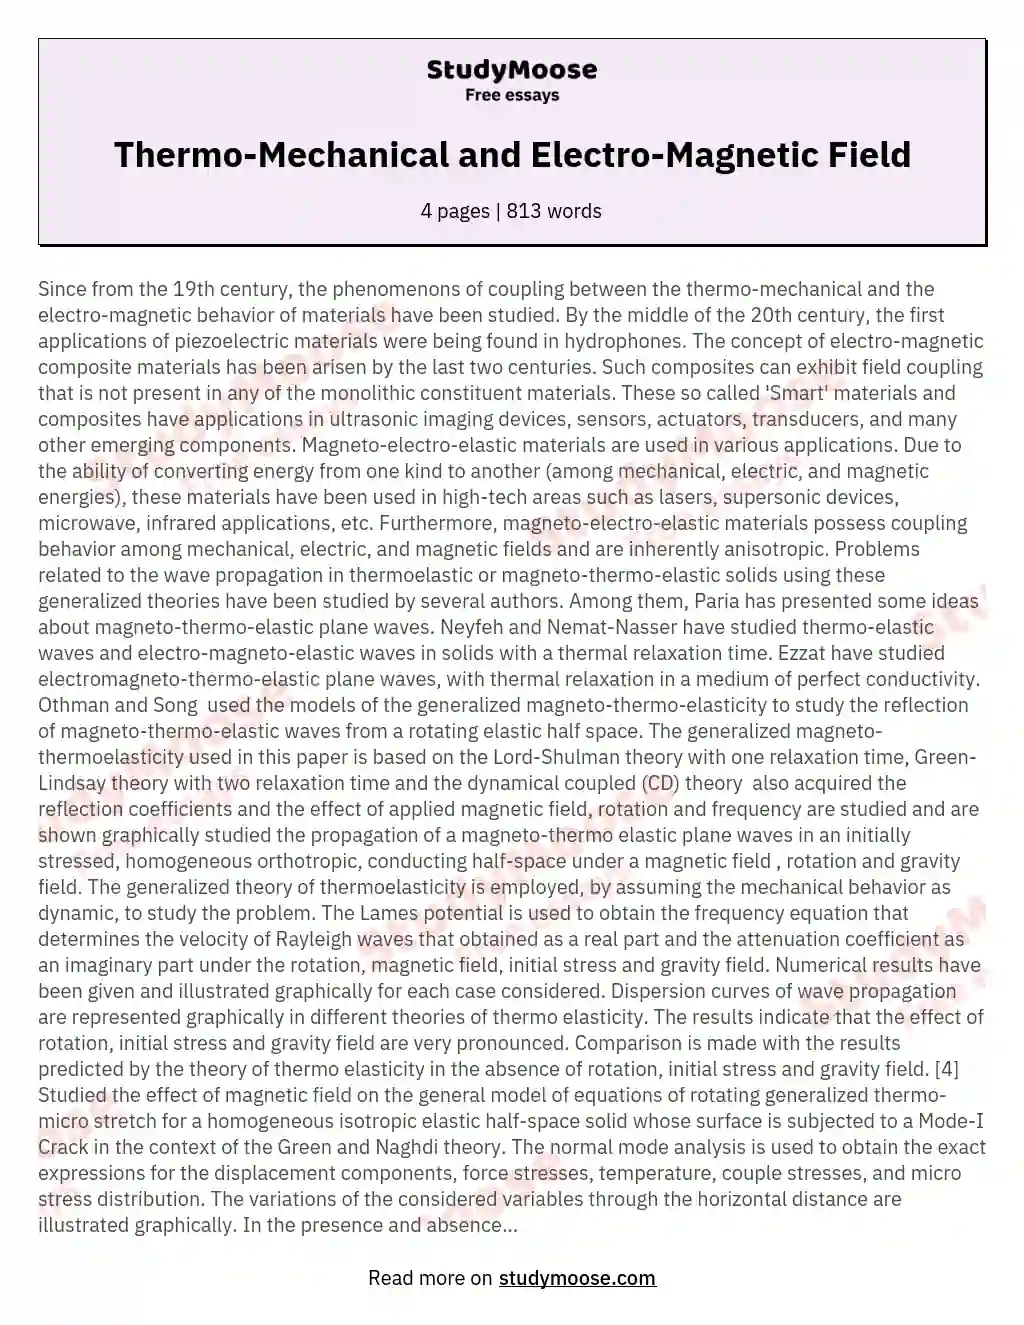 Thermo-Mechanical and Electro-Magnetic Field essay